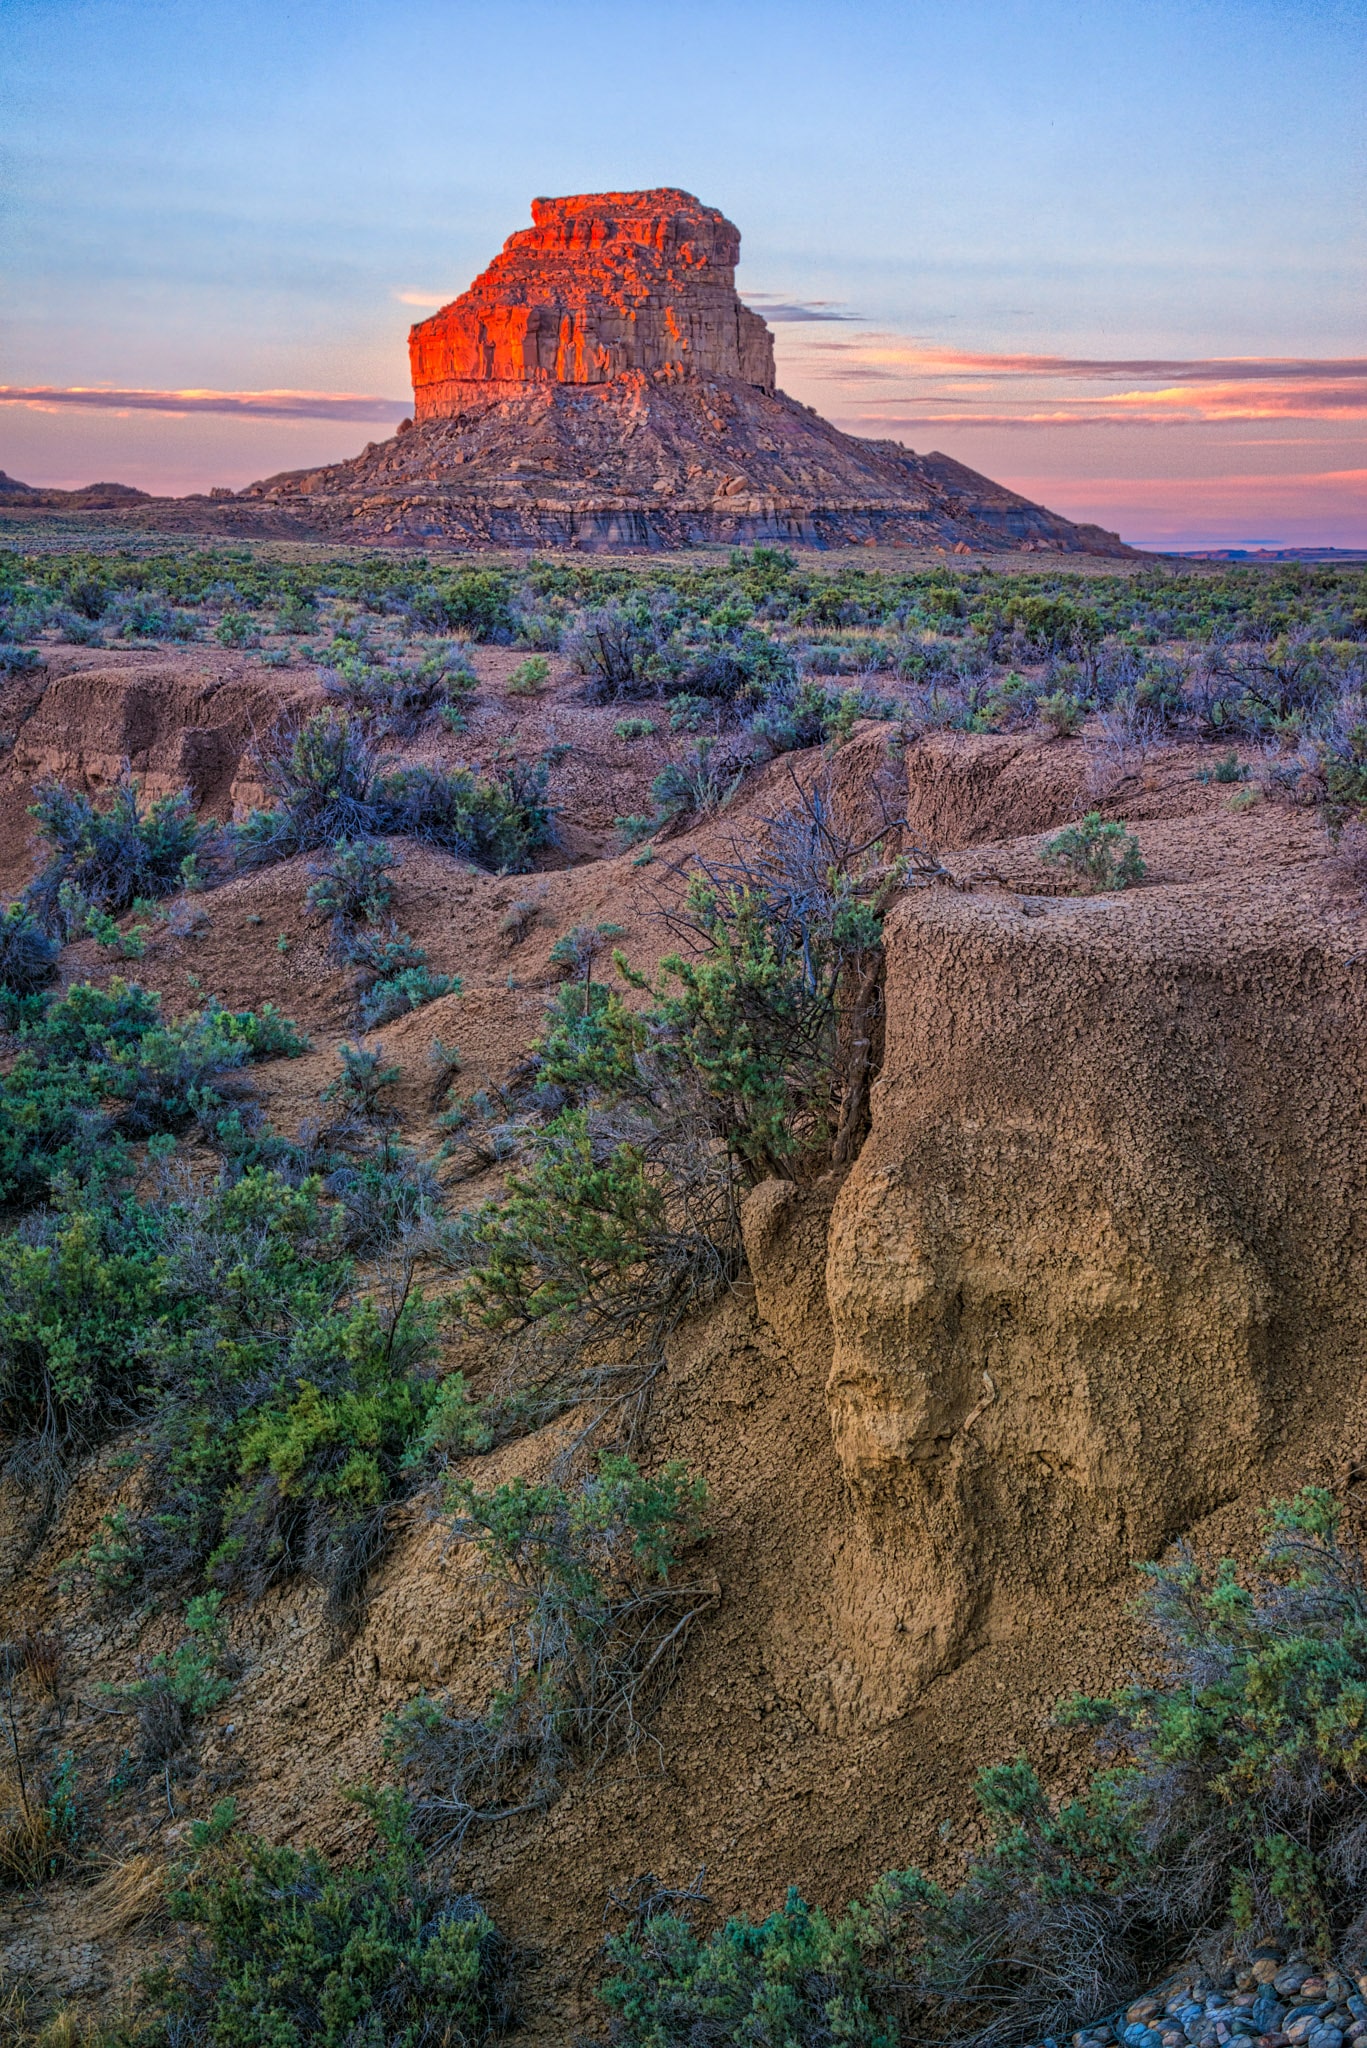 Fajada Butte in Chaco Canyon in New Mexico glows red in the early morning sun.